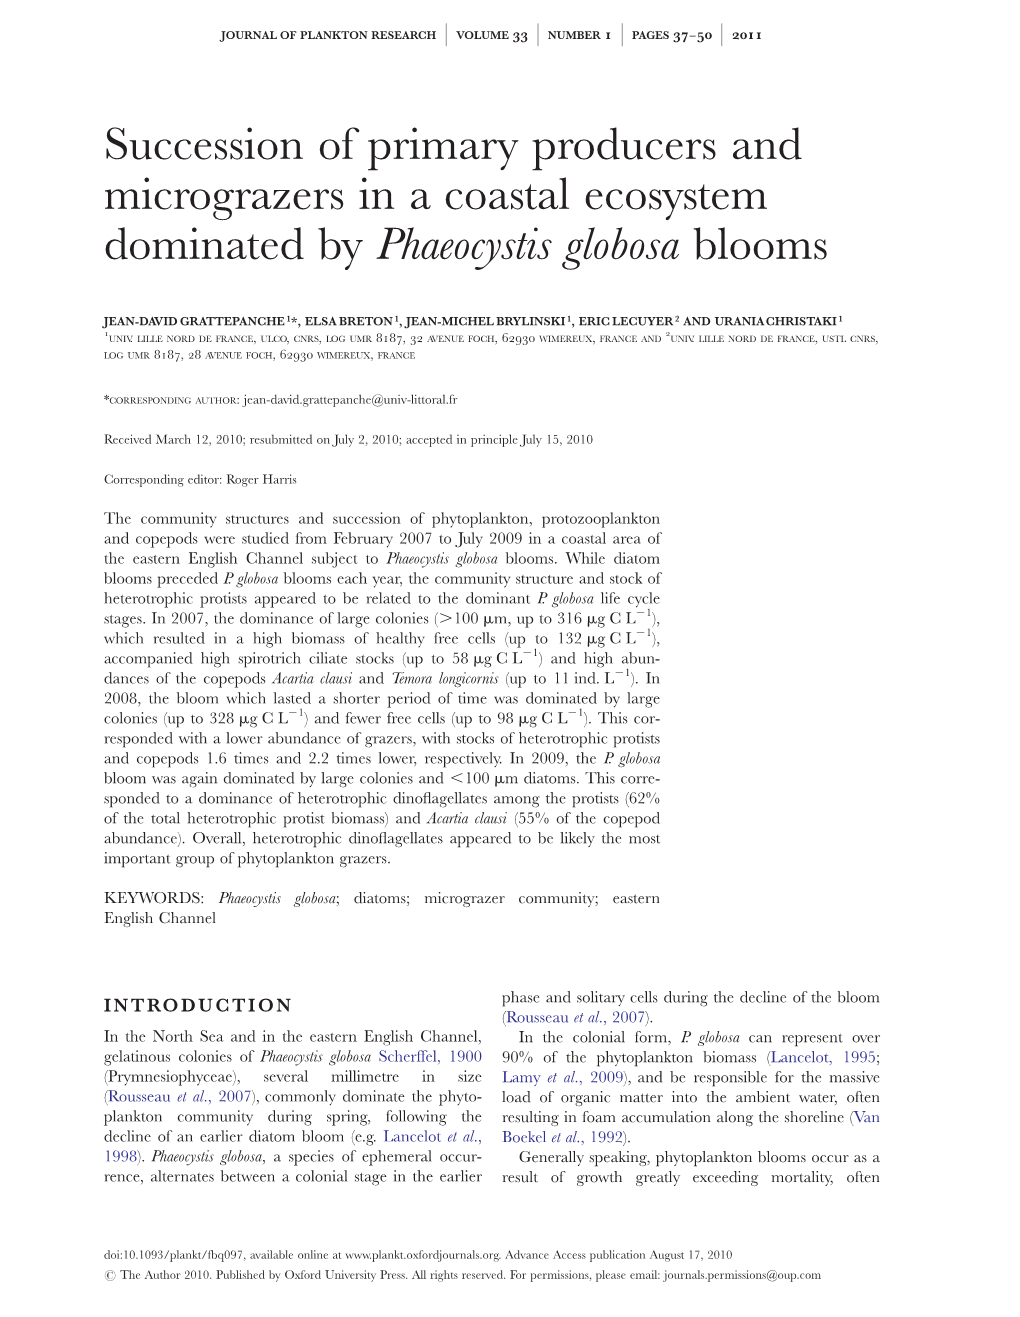 Succession of Primary Producers and Micrograzers in a Coastal Ecosystem Dominated by Phaeocystis Globosa Blooms